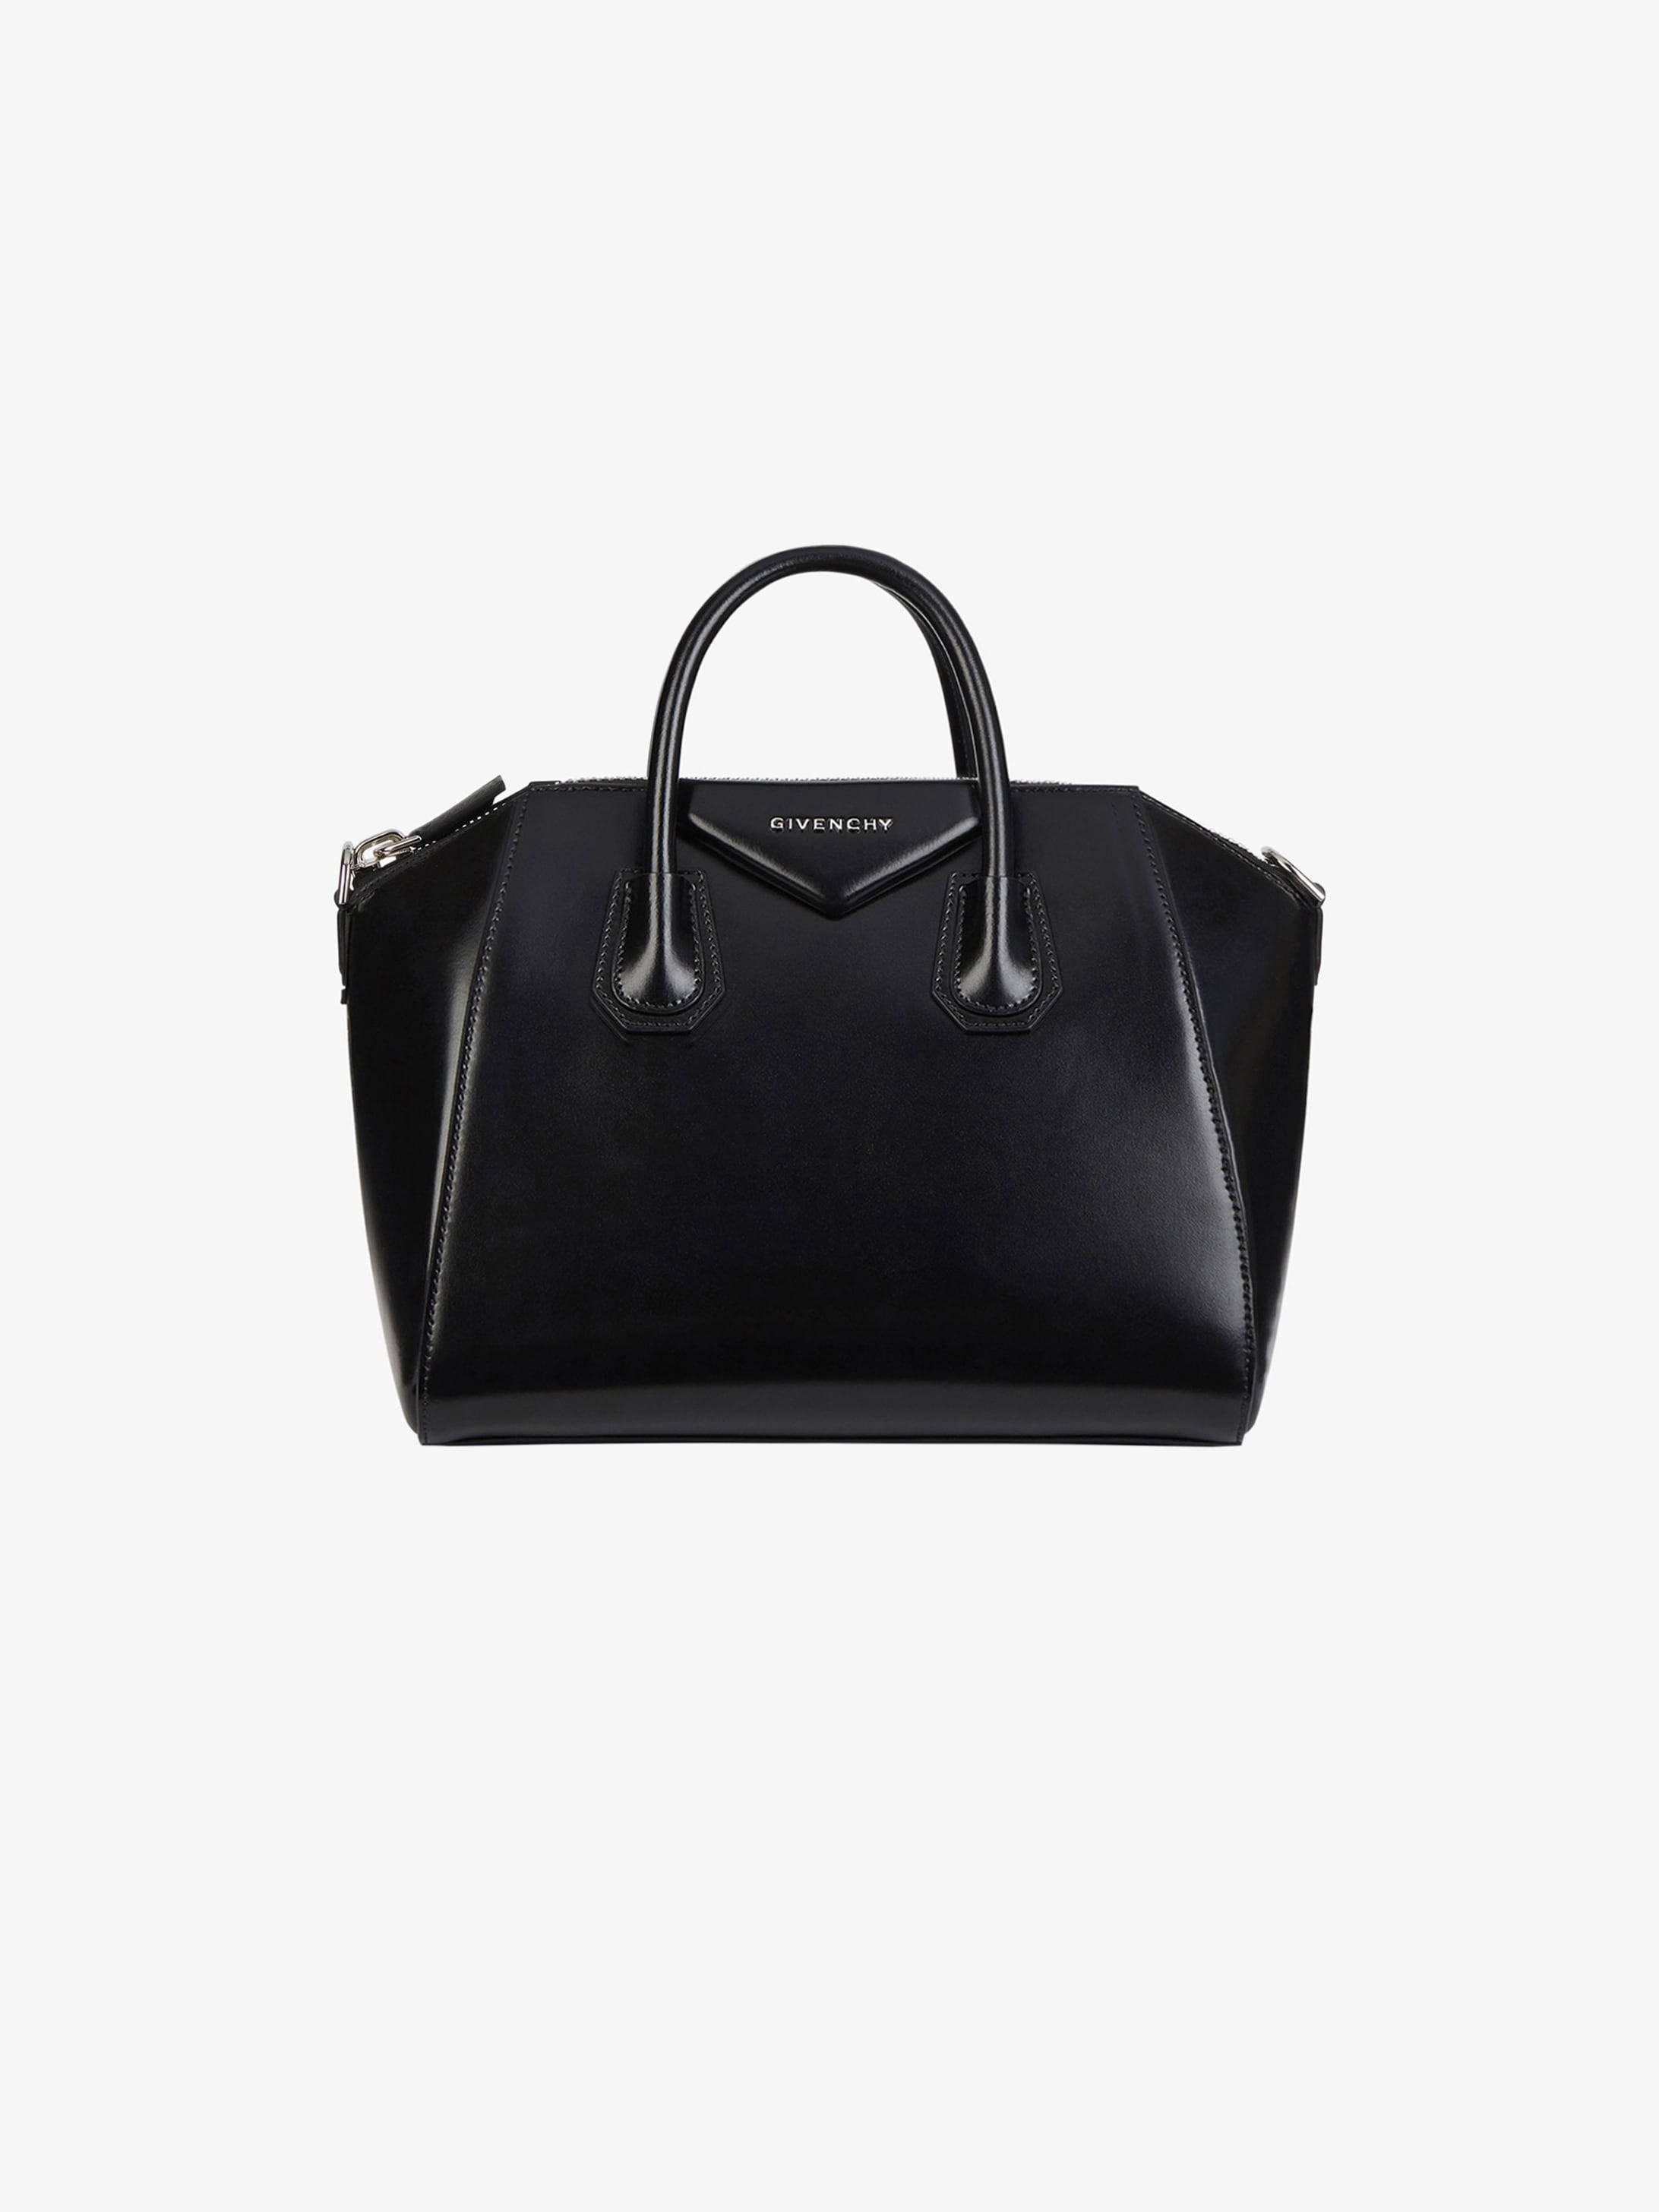 Last Givenchy Bags